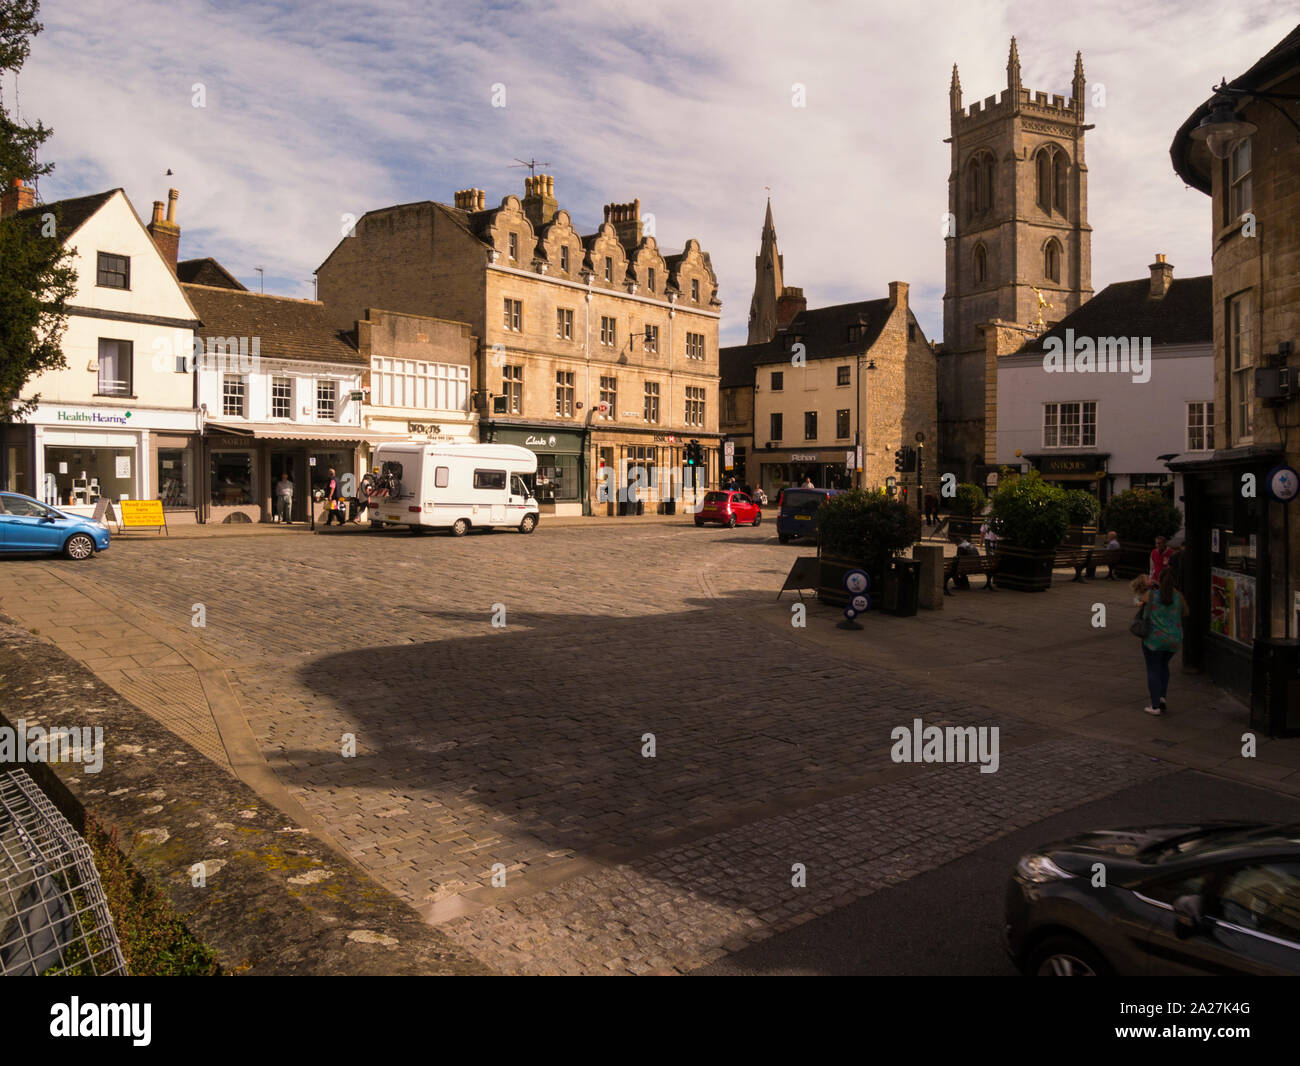 View across Red Lion Square showing two parish churches Stamford Lincolnshire Eastern England UK on a lovely September day in this attractive historic Stock Photo